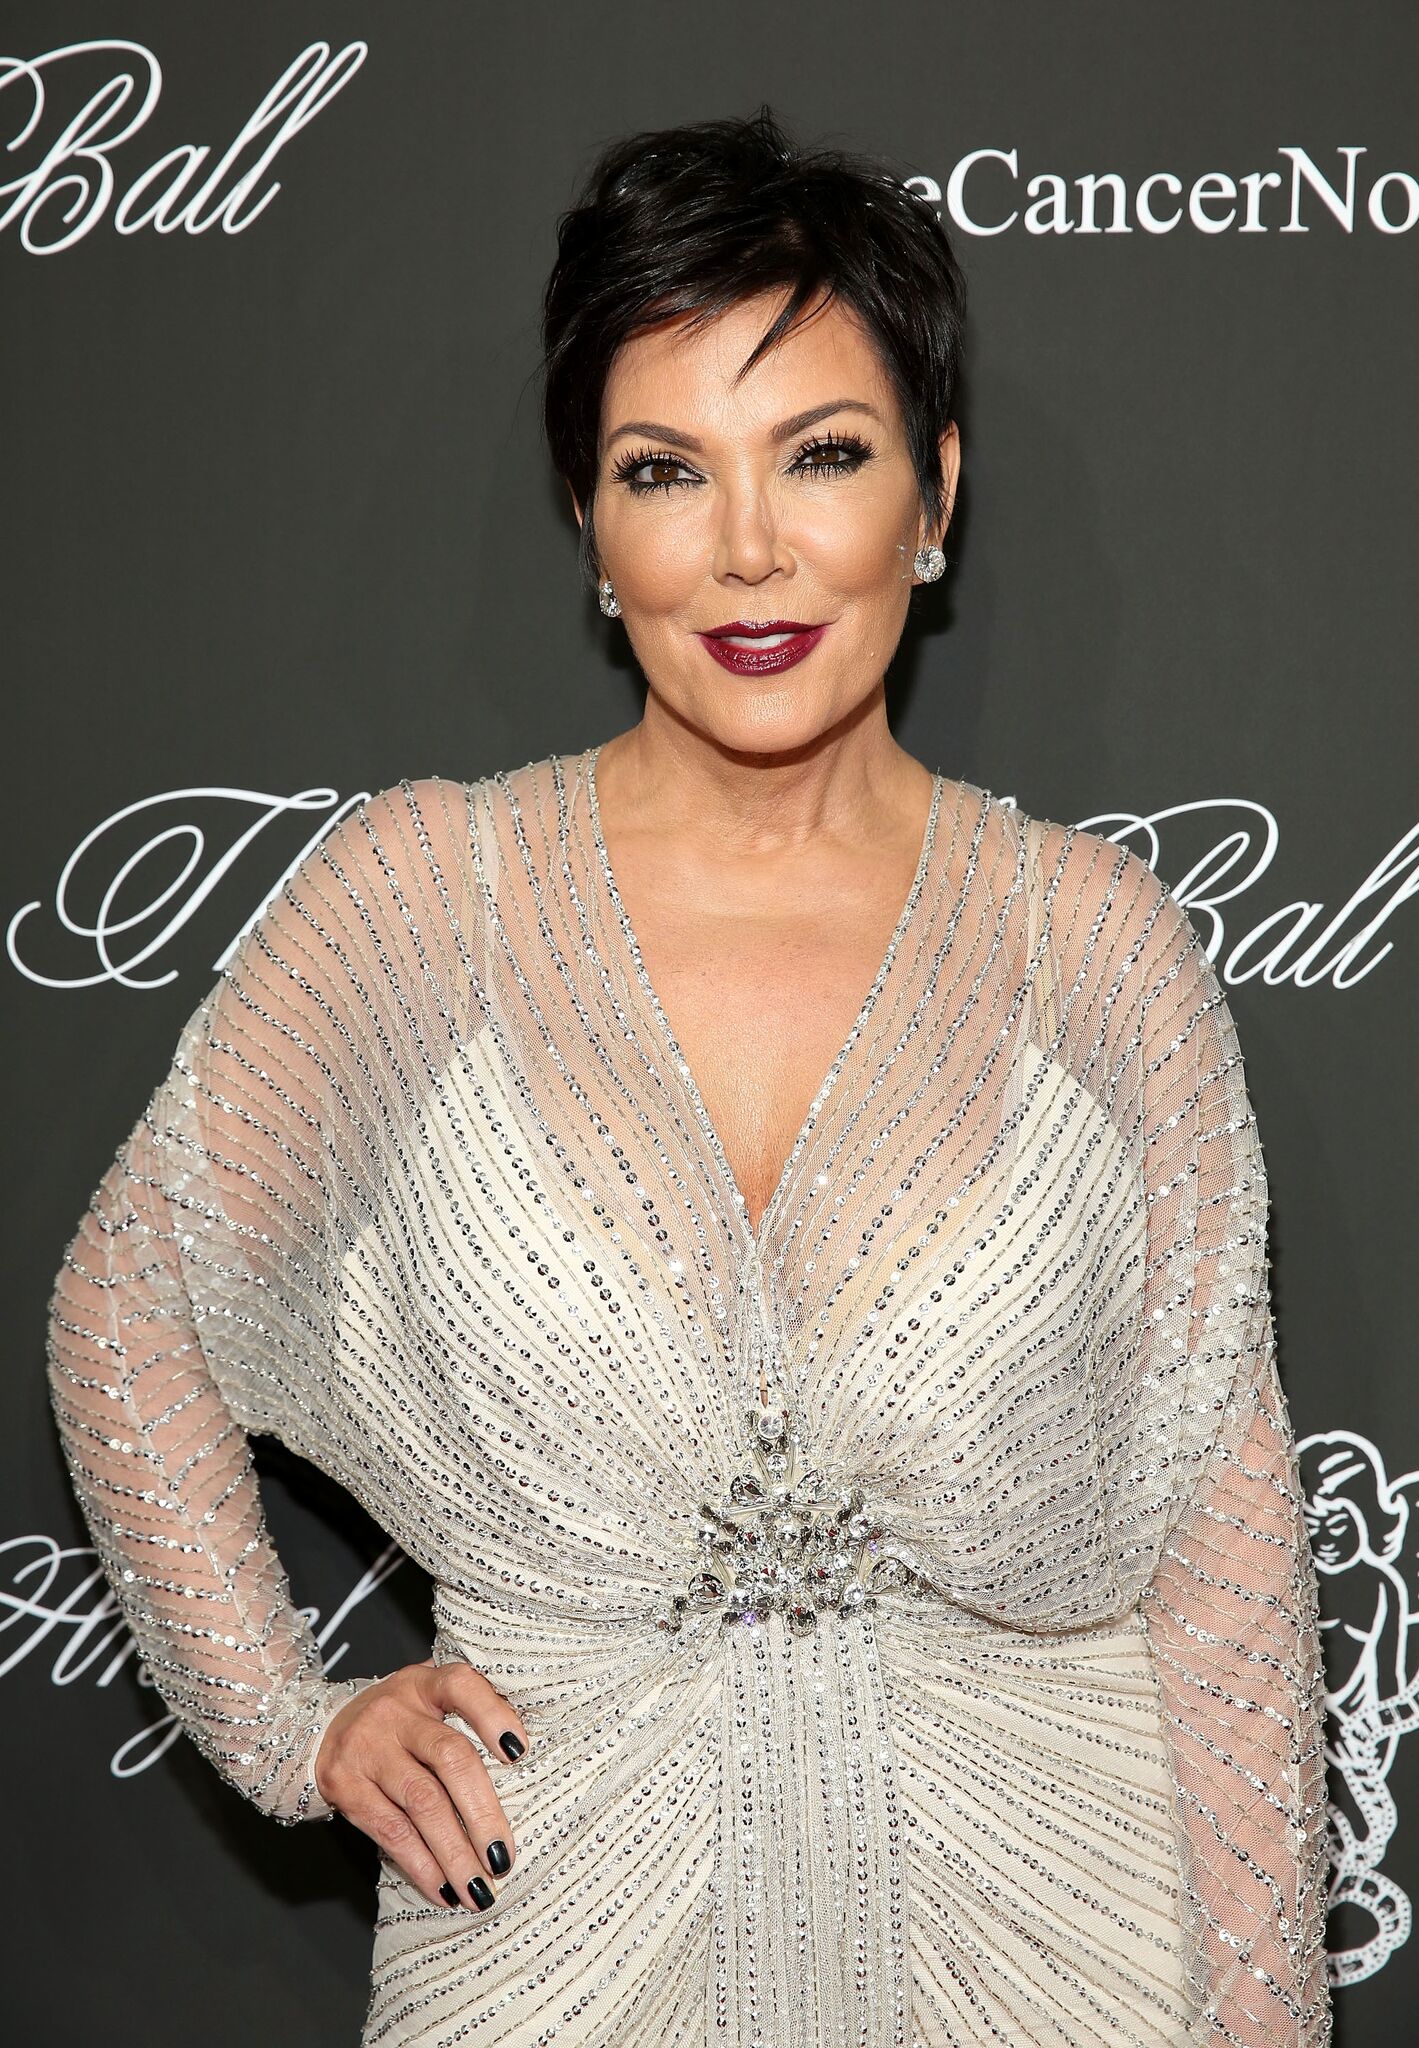 Kris Jenner attends Angel Ball 2014 at Cipriani Wall Street | Getty Images